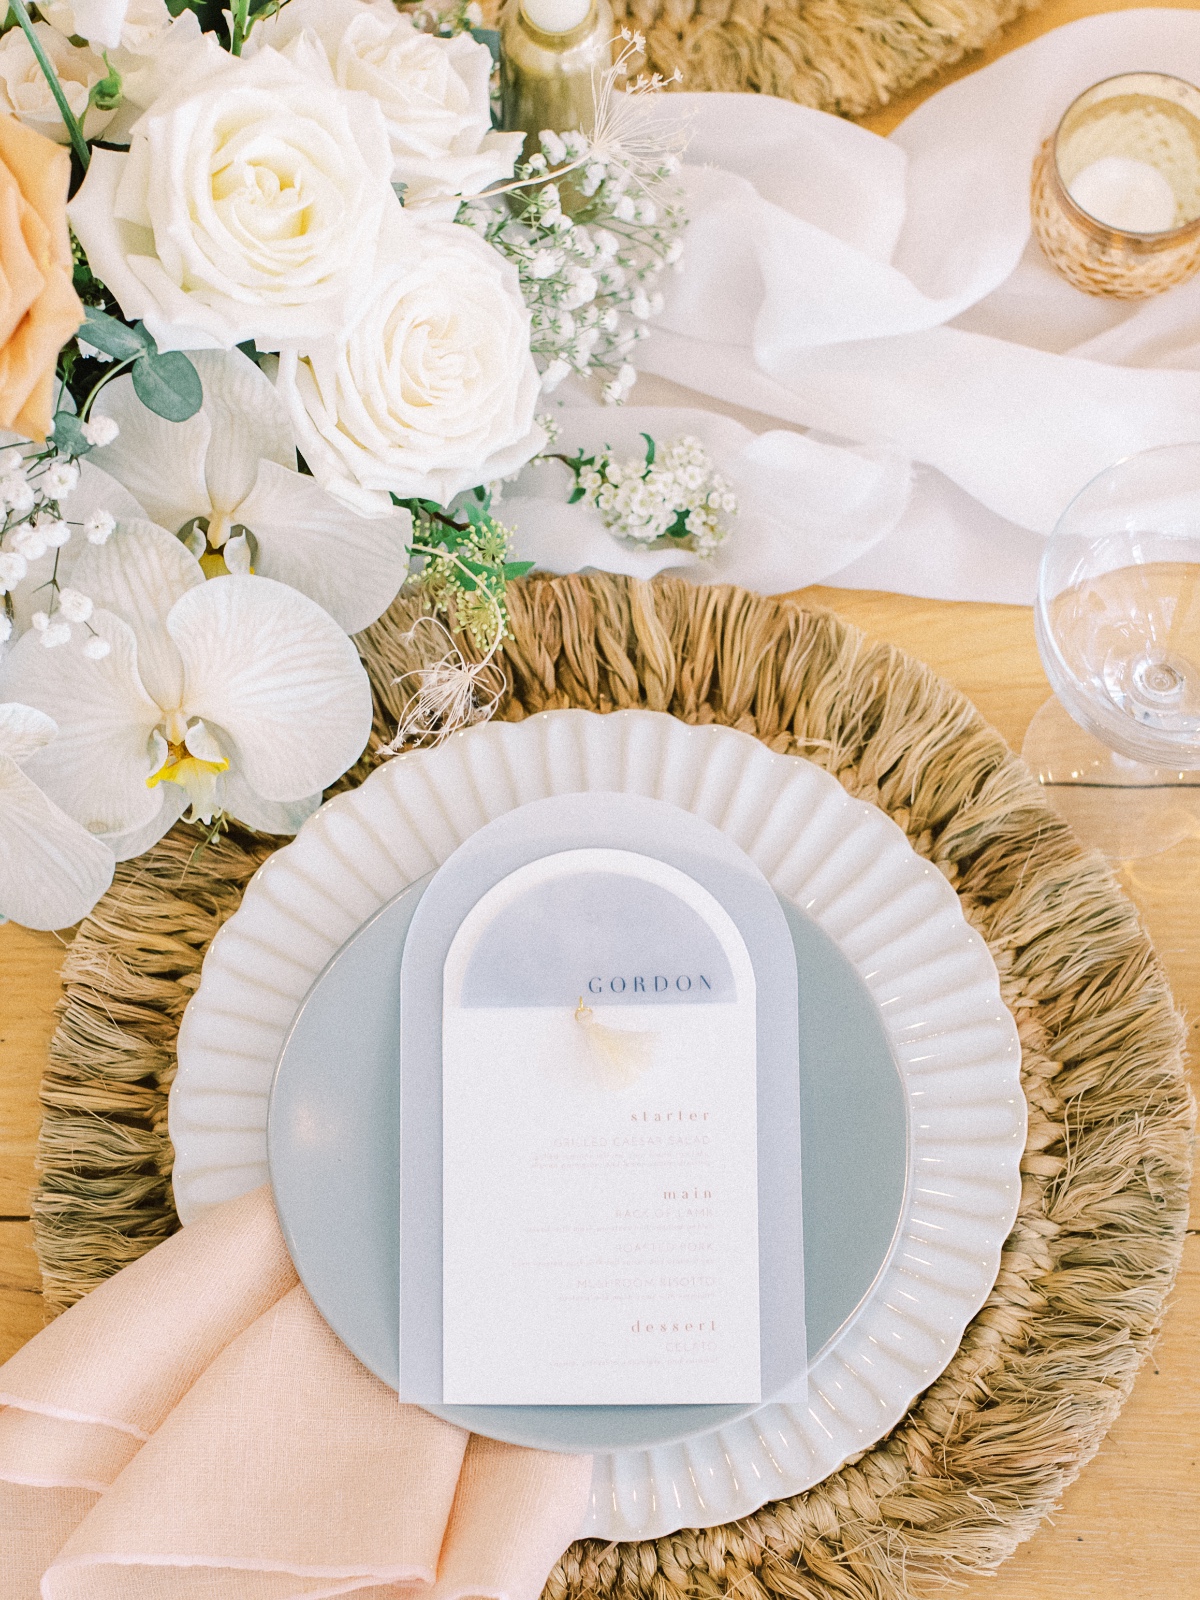 What Do You Get When You Combine The Current Wedding Trends Into One Design?